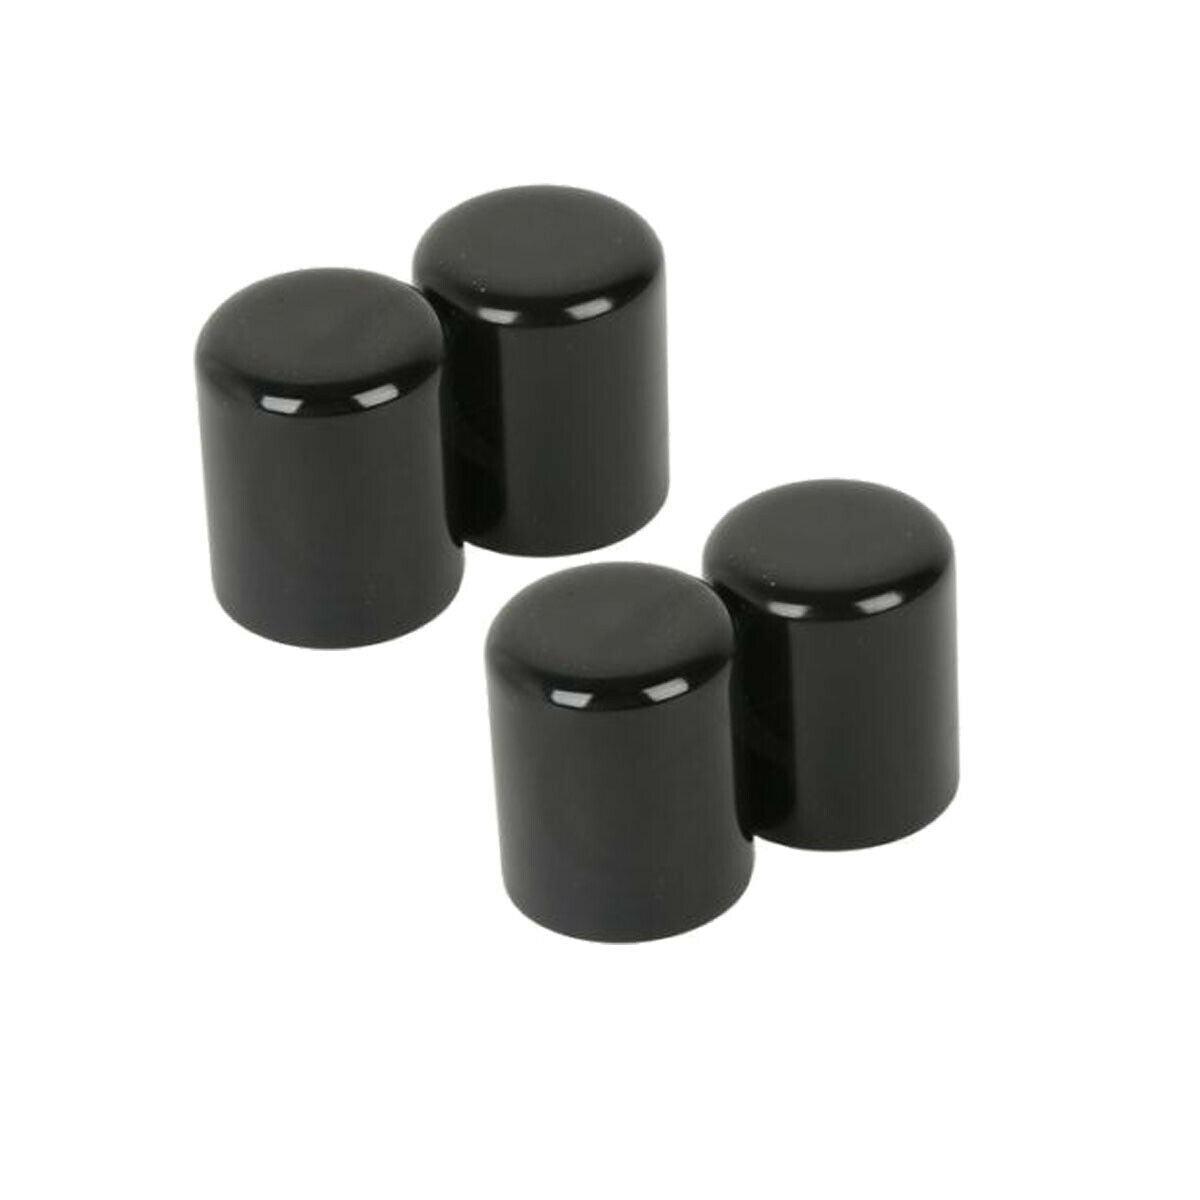 4x Black Docking Hardware Point Covers Kit For Harley Davidson Touring Softail - Moto Life Products